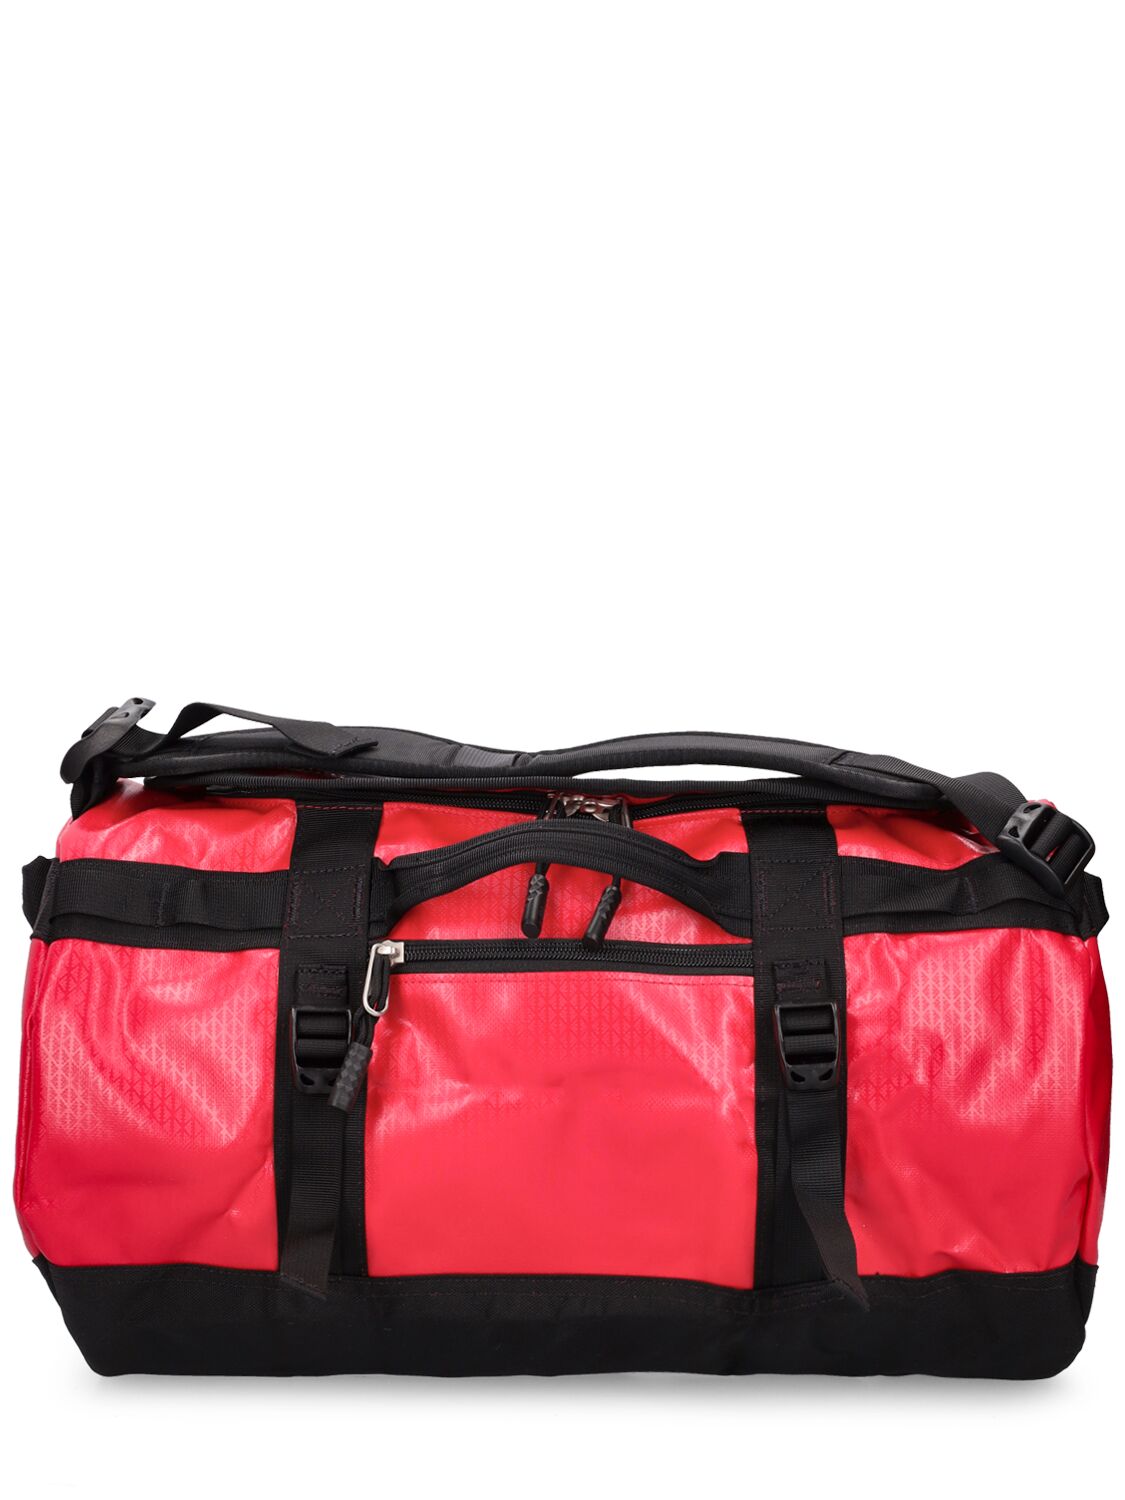 THE NORTH FACE 31L BASE CAMP DUFFLE BAG